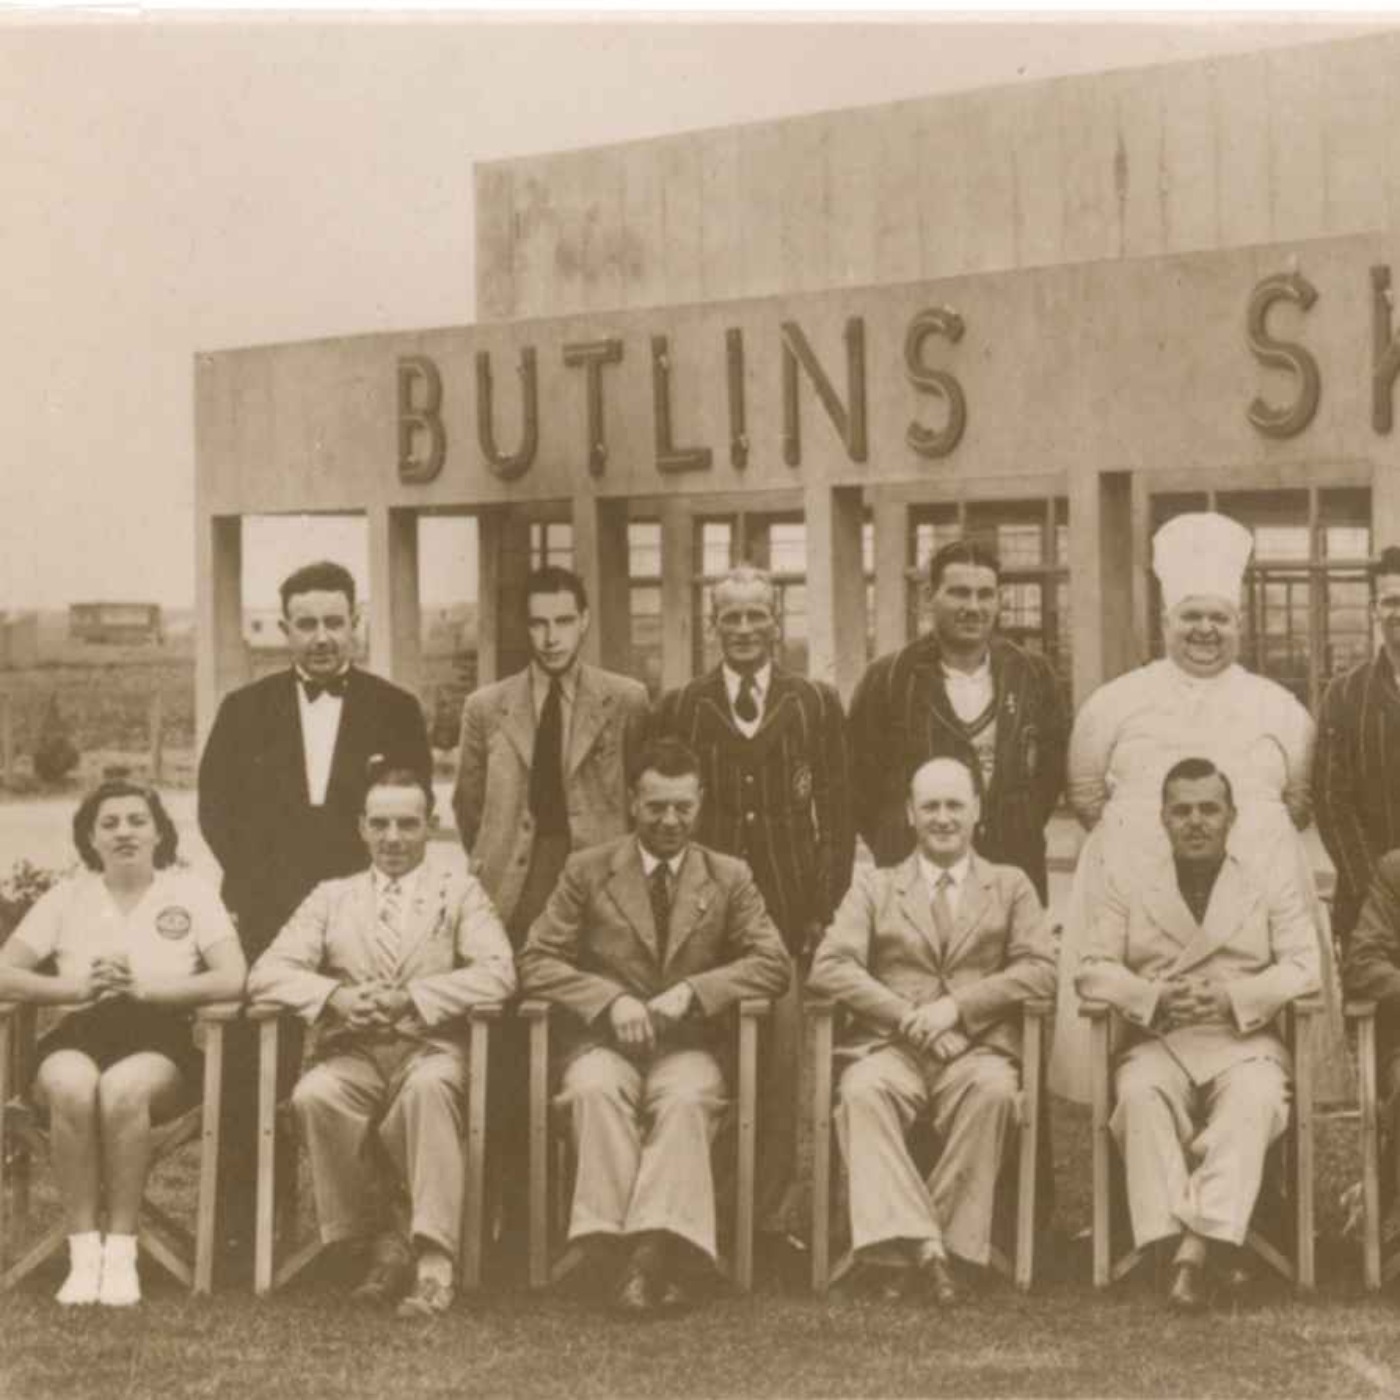 Let's Go To Butlin's